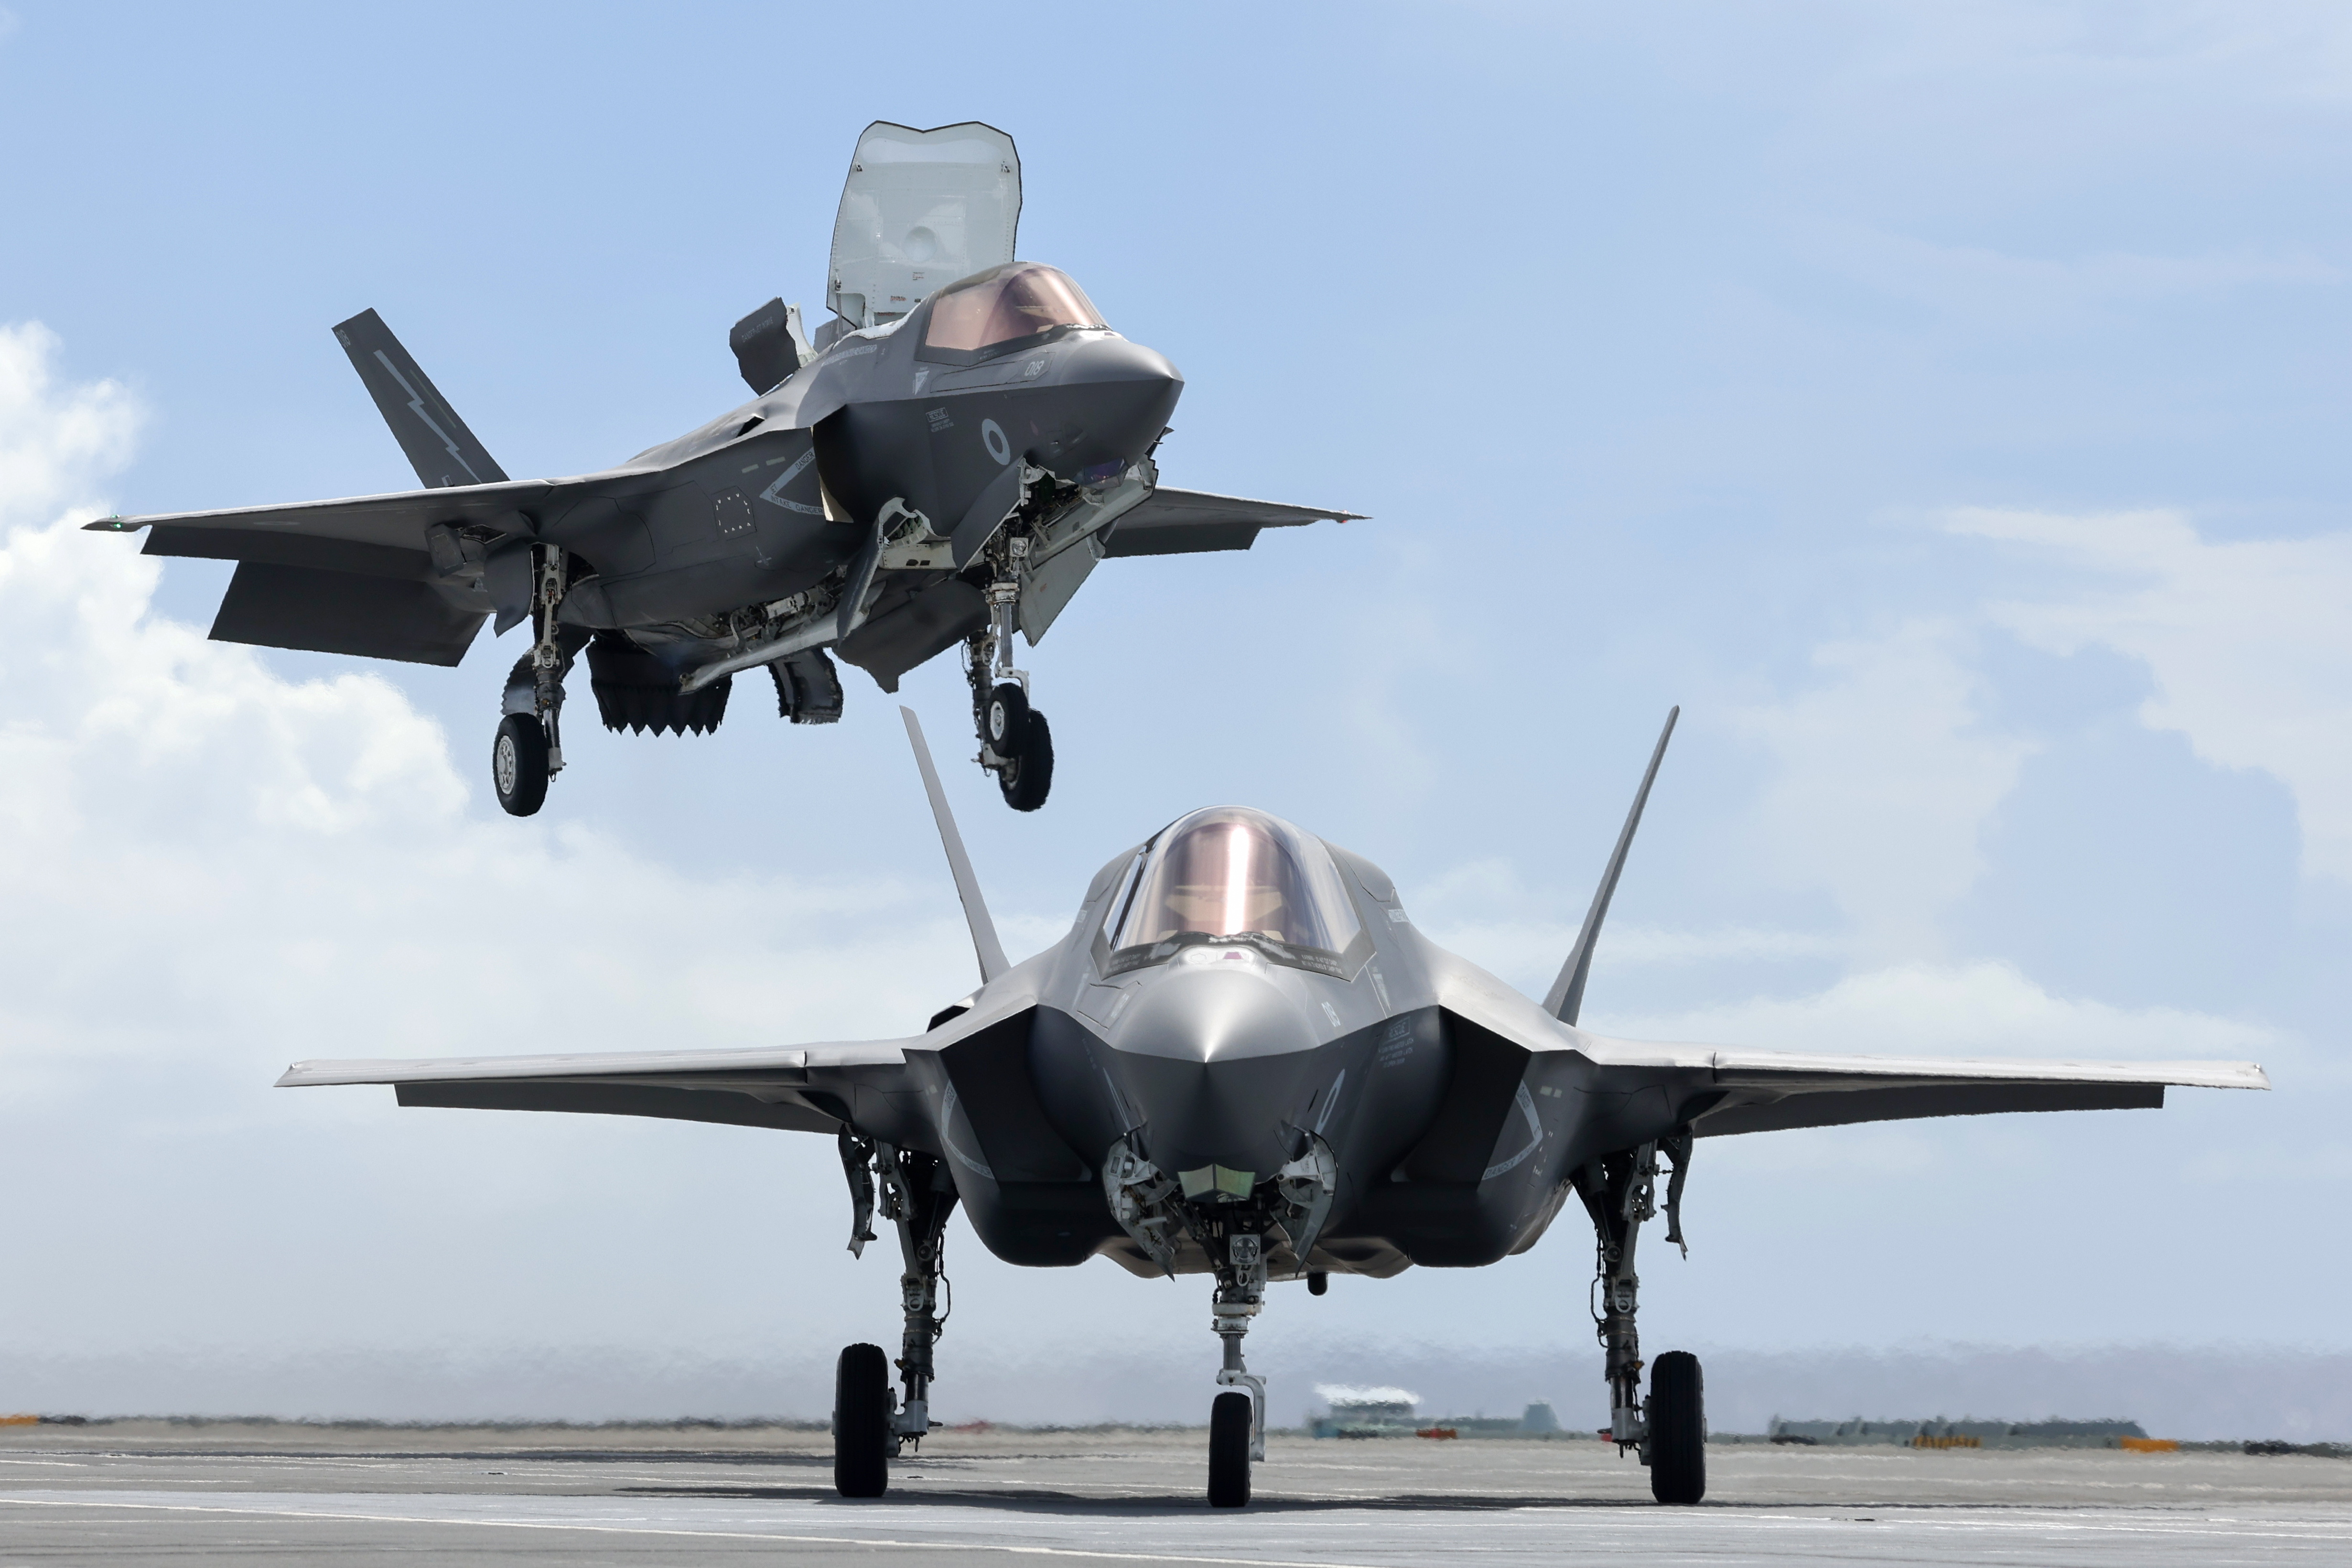 F-35B Lightning fighters launched simultaneously from Carrier flight decks | Royal Air Force